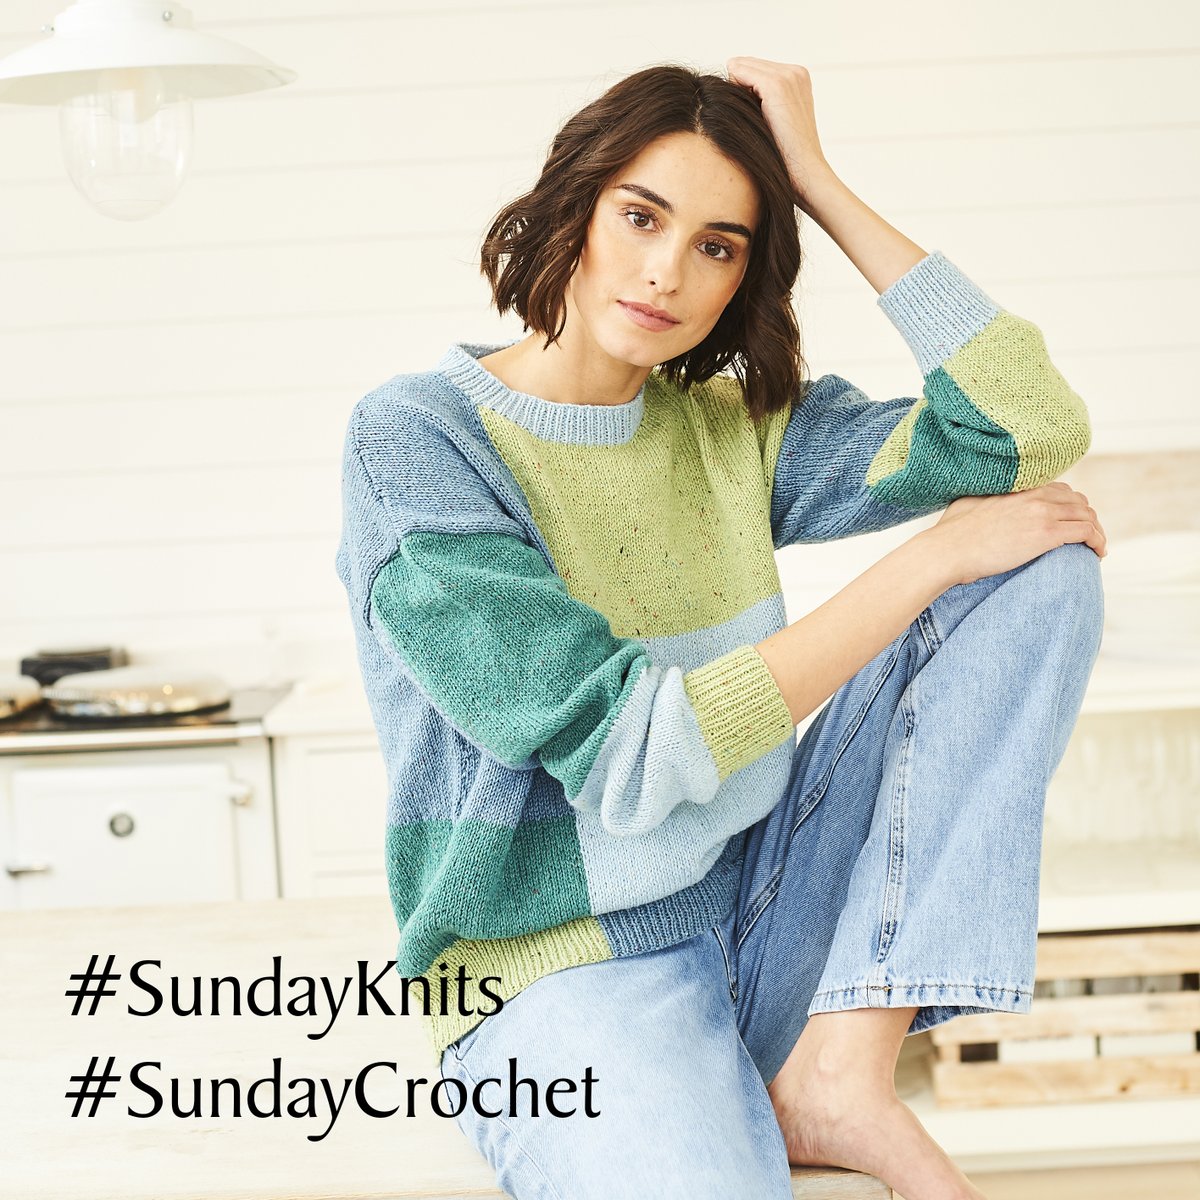 Have you #Sundayknits or #Sundaycrochet plans for today? Tell us about your crafting and post a pic below. (Pic 10060 knitted in Recreate DK)